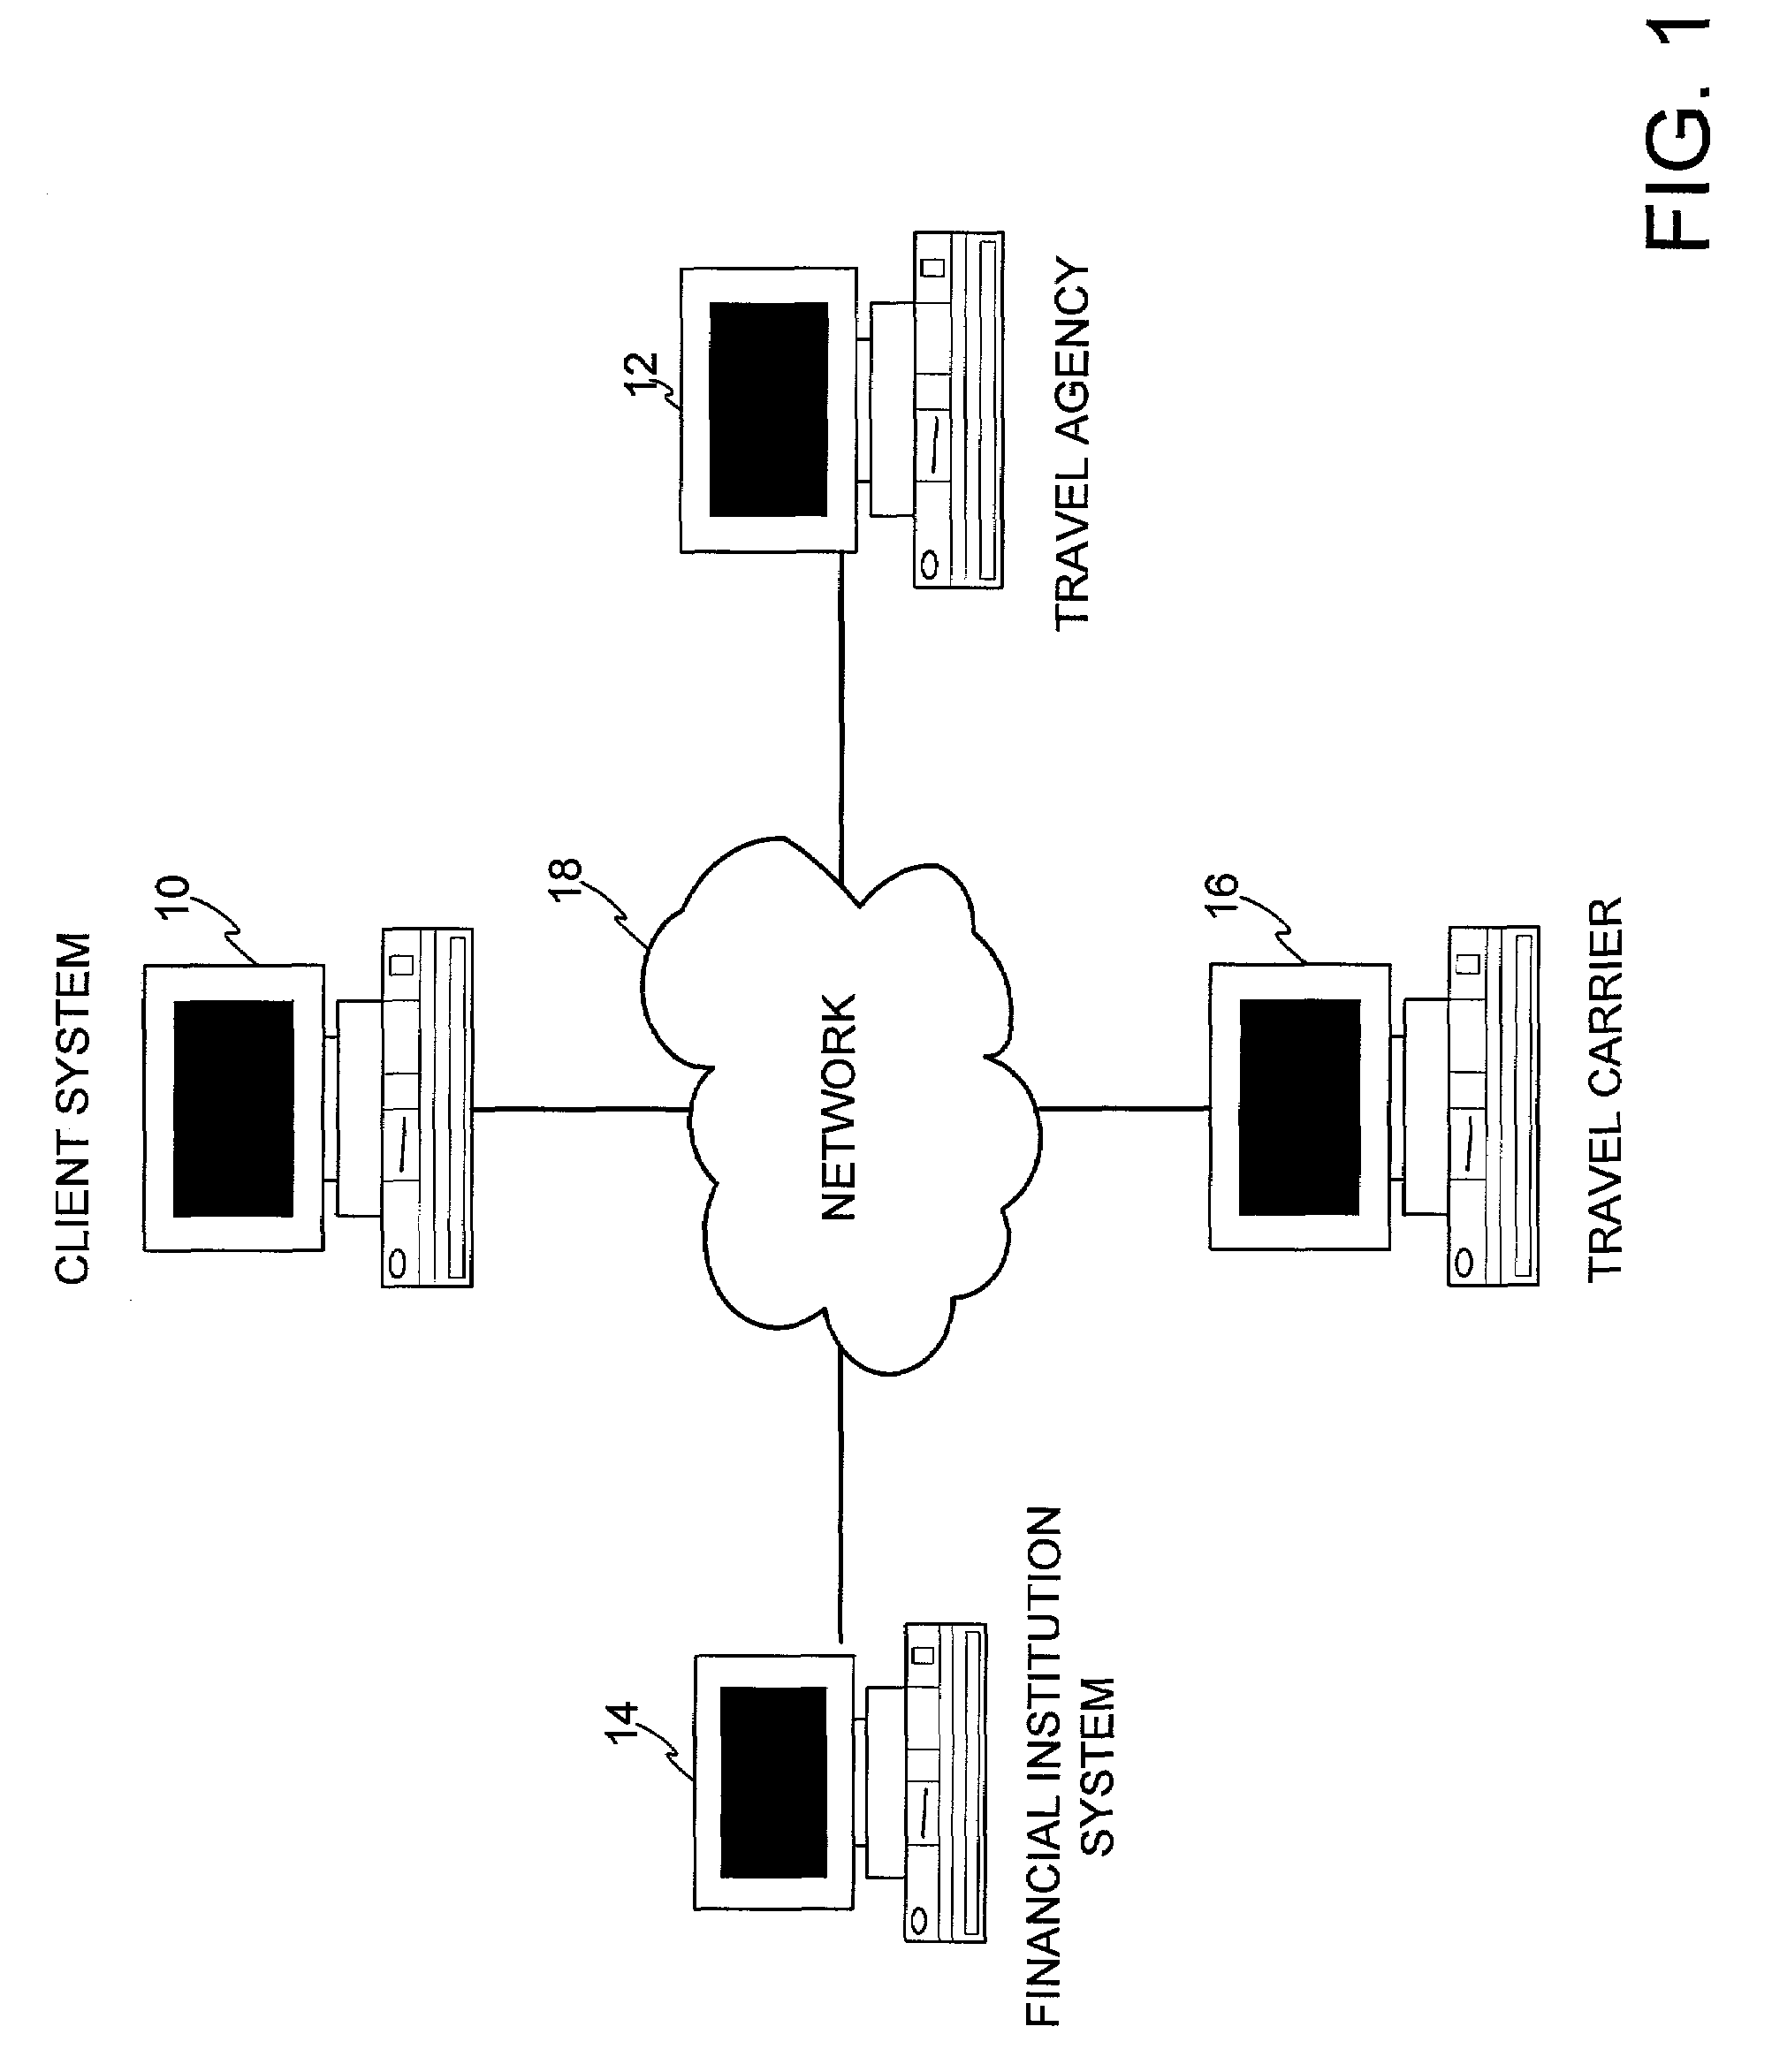 System and method for travel carrier contract management and optimization using spend analysis